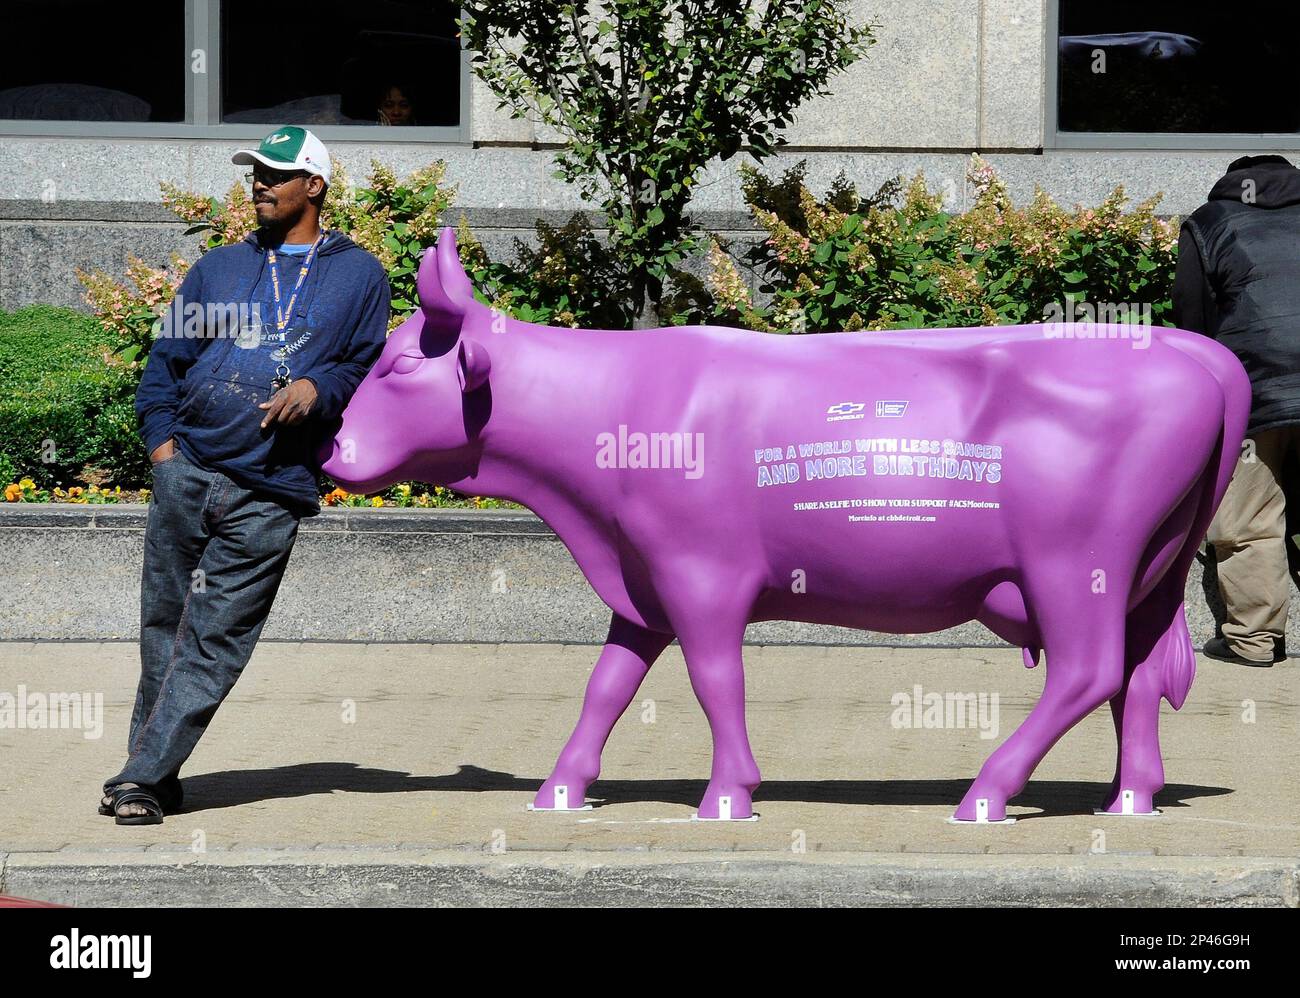 Carlos Gant takes a break while waiting for a ride next to a statue of a  purple cow in Detroit on Sept. 14, 2014. Statues of purple cows around  downtown Detroit are